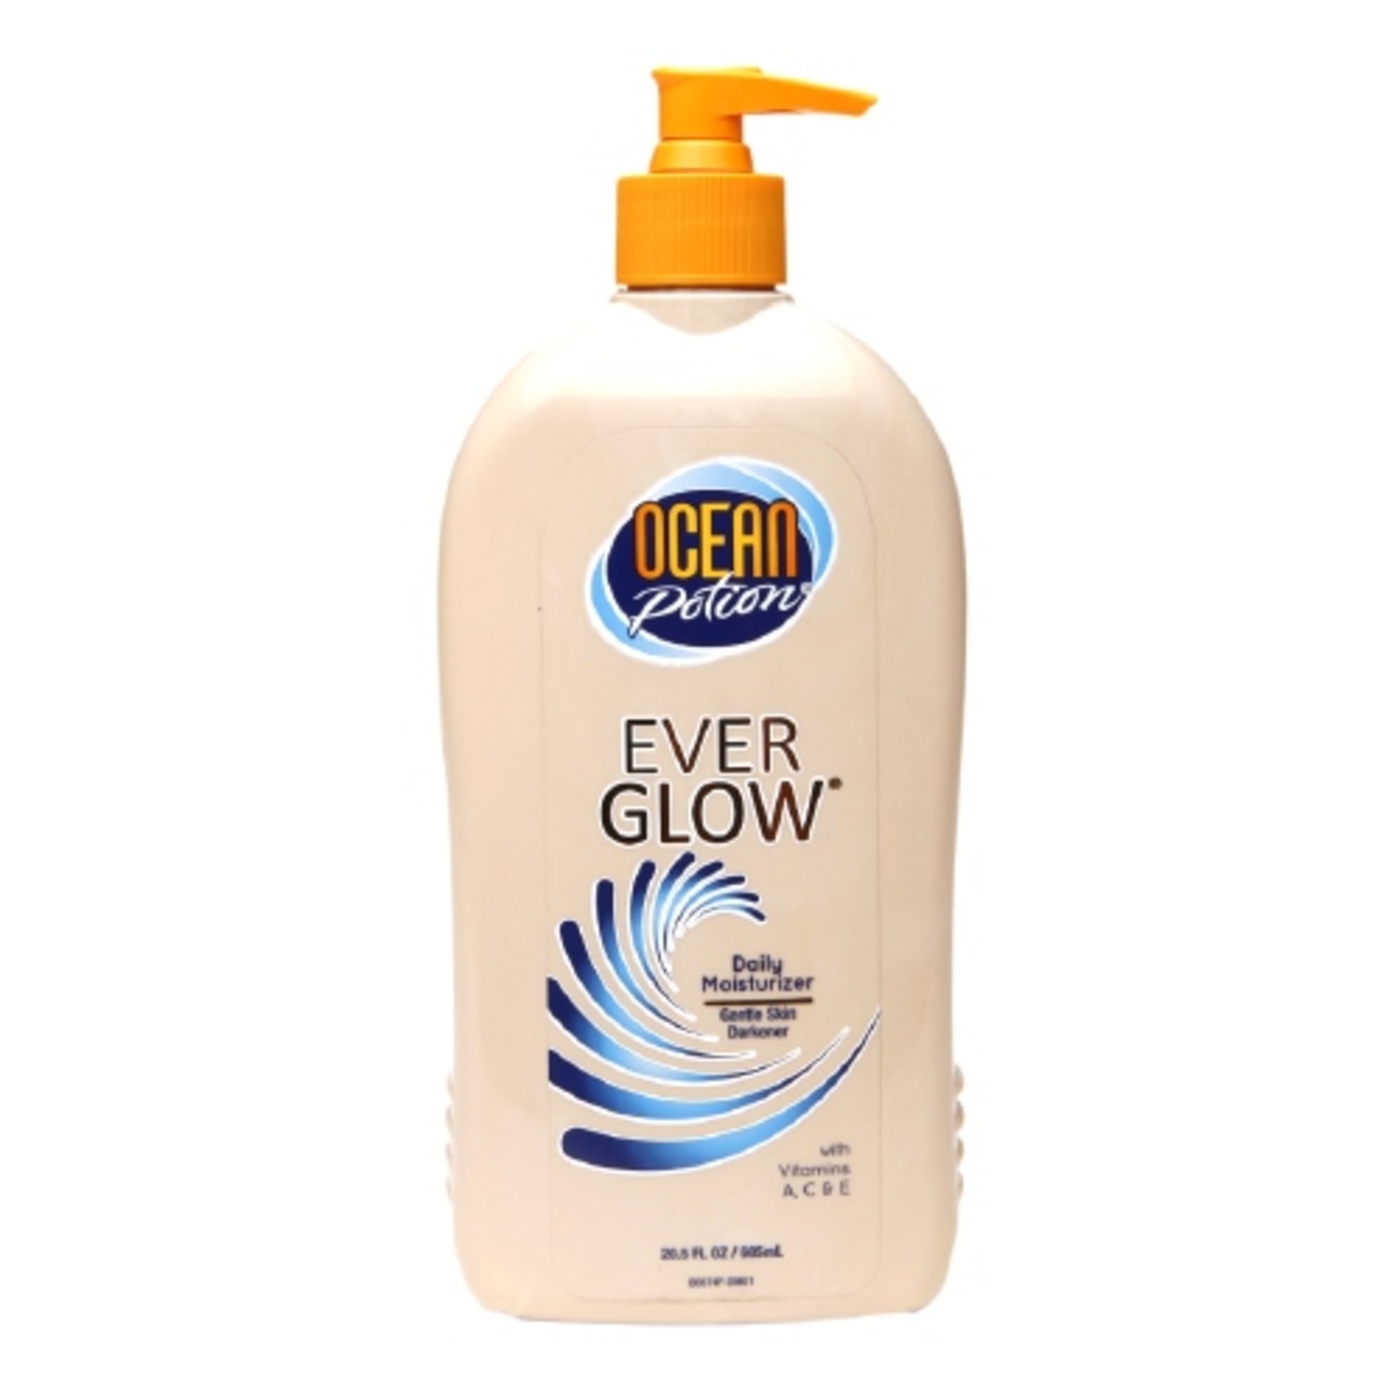 Ocean Potion Suncare Ever Glow Daily Moisturizer with